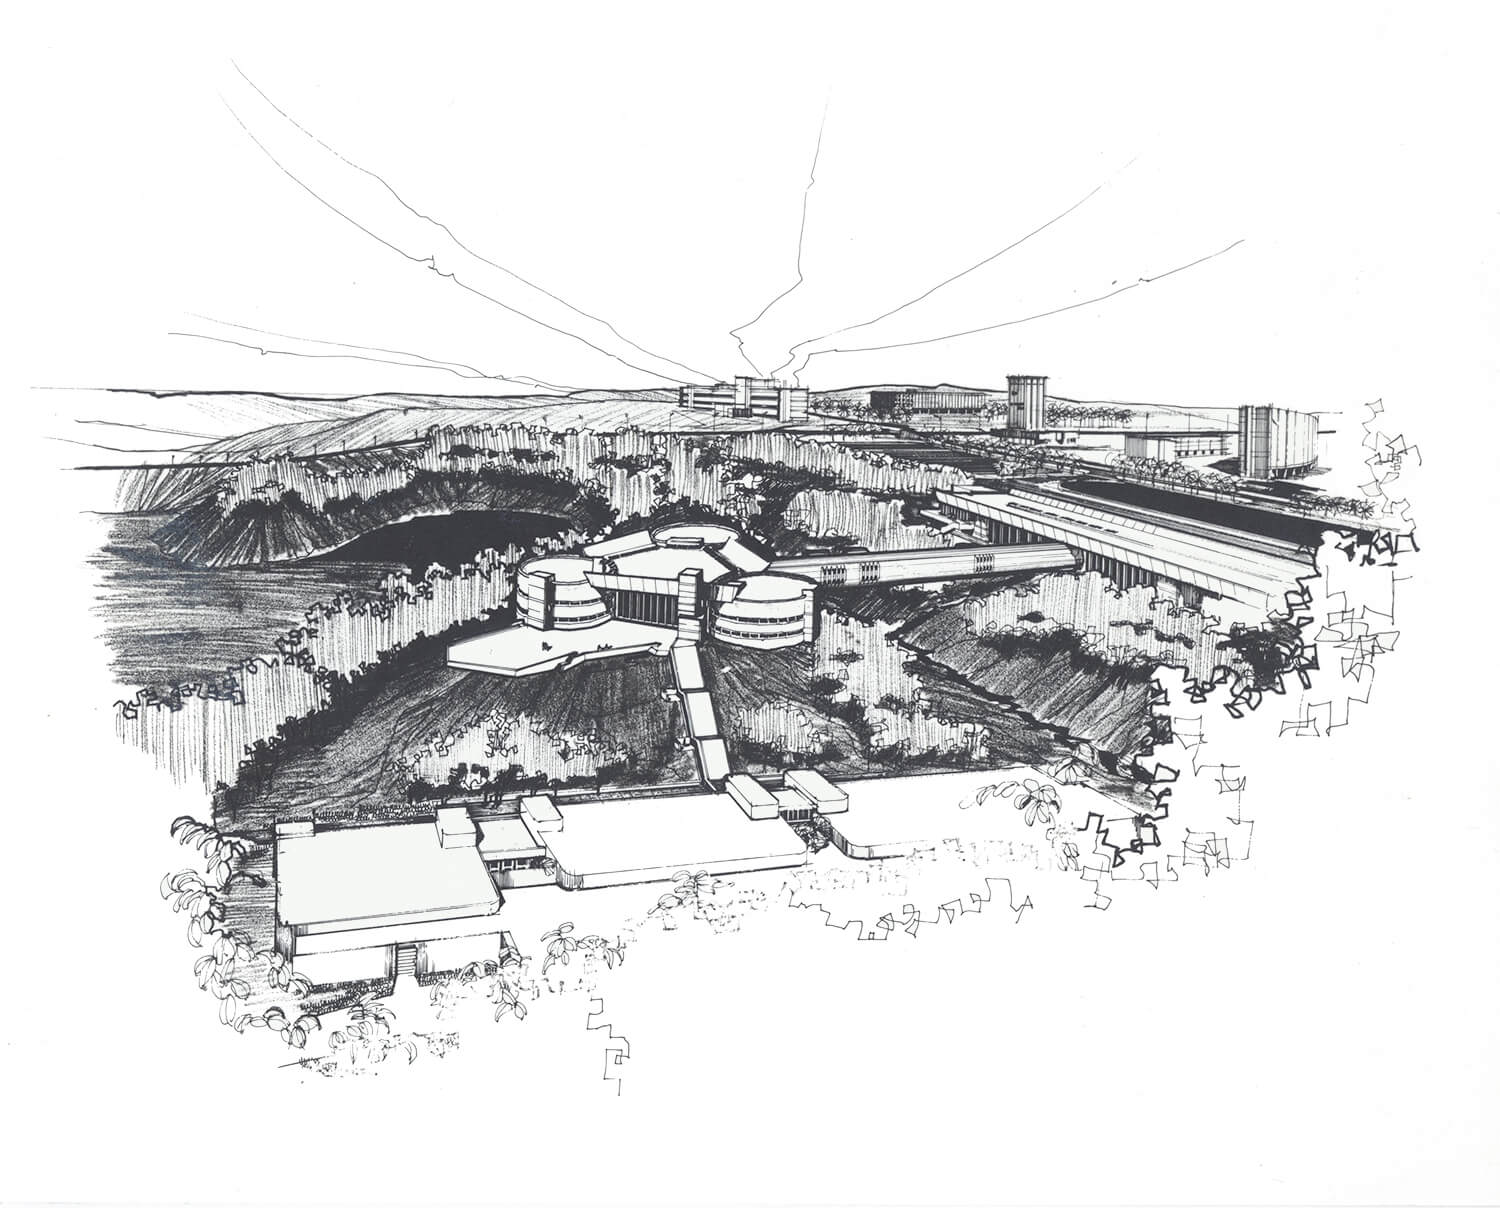 drawing of a science center and surrounding urban area